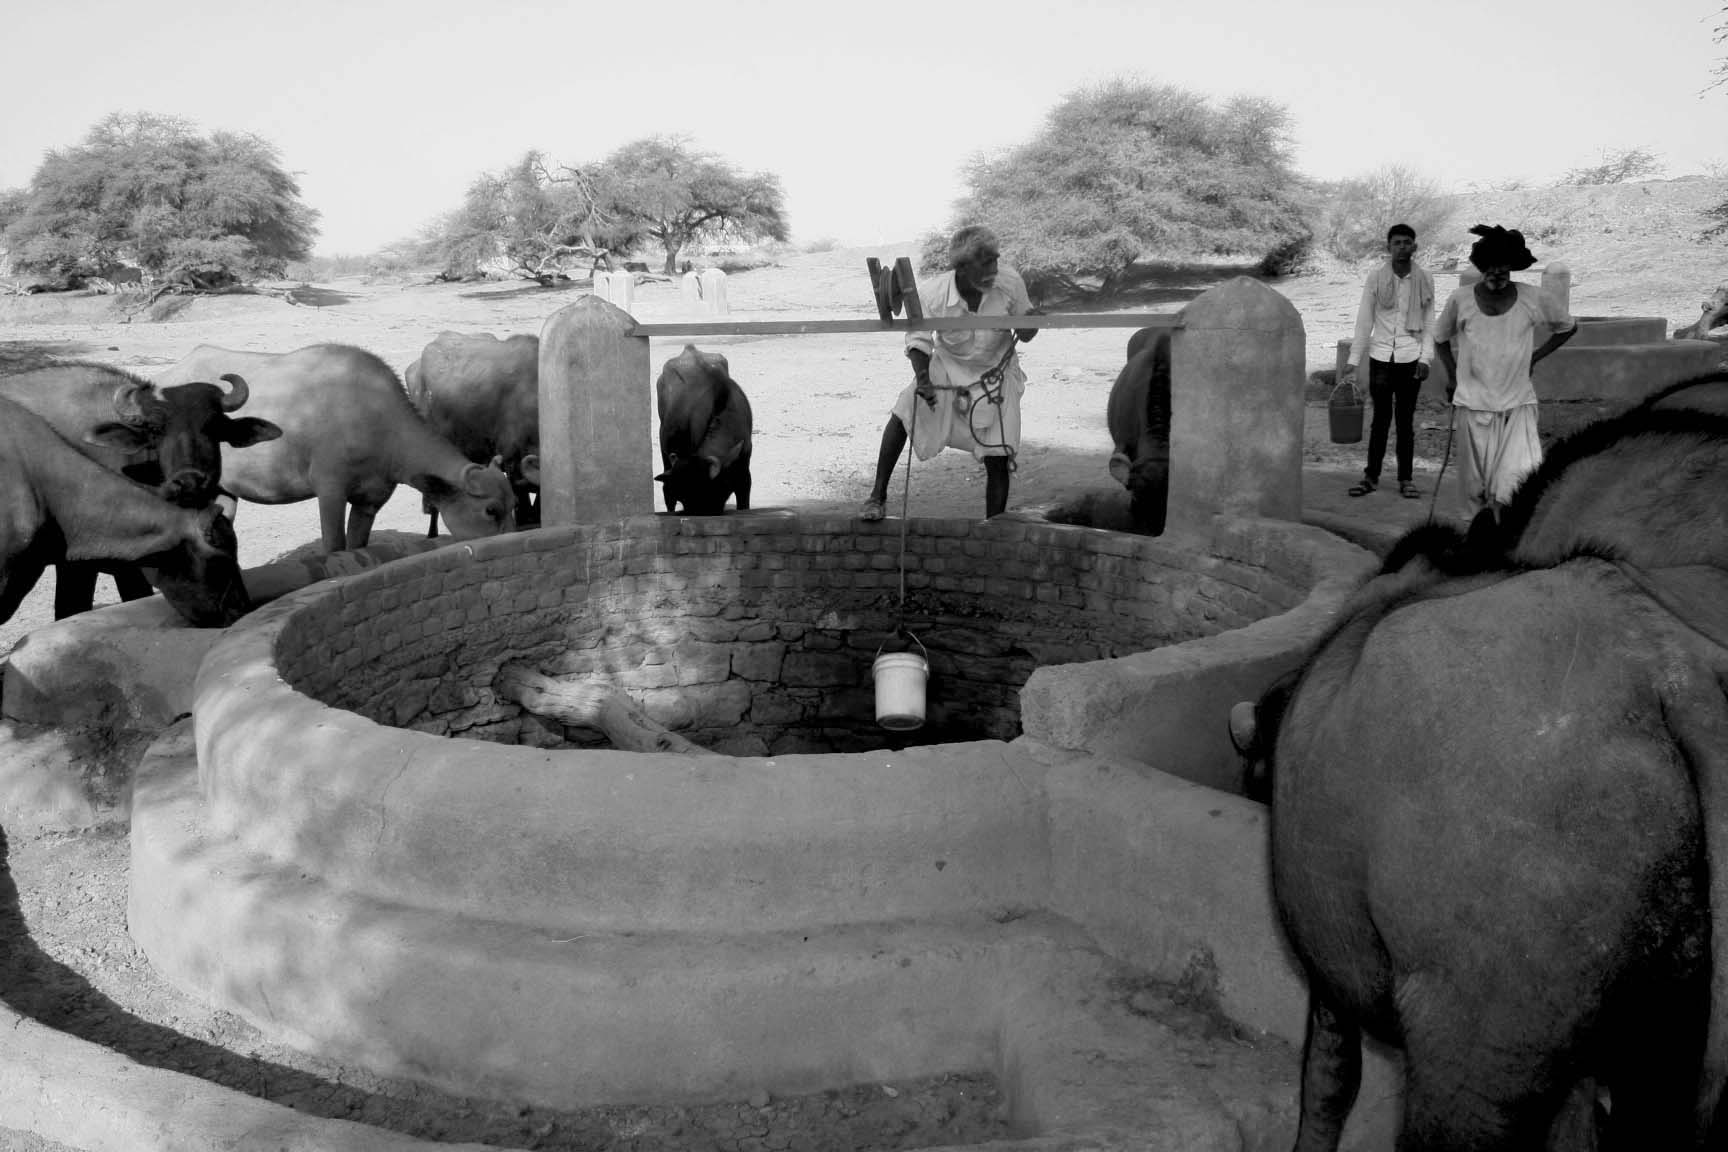 There is always water in the  well in Nanda village. Thanks to the regular water supply, the animals in the village are stronger and the income from them have increased.